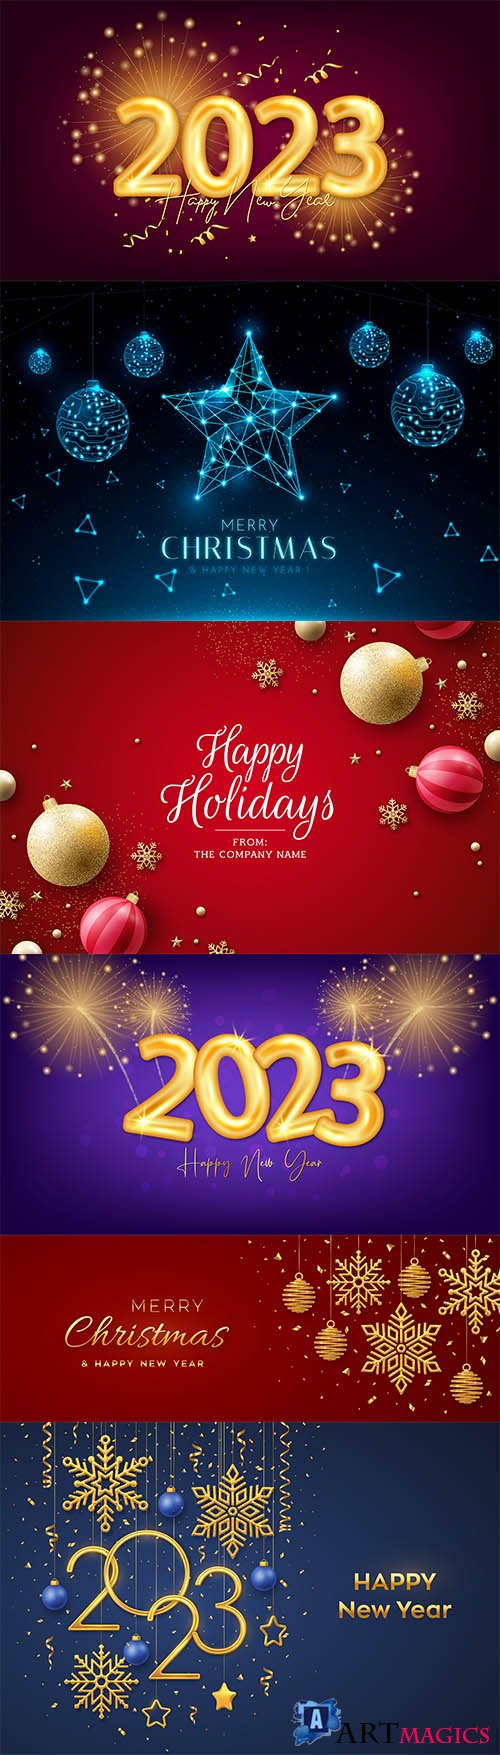 Christmas vector background with realistic decoration